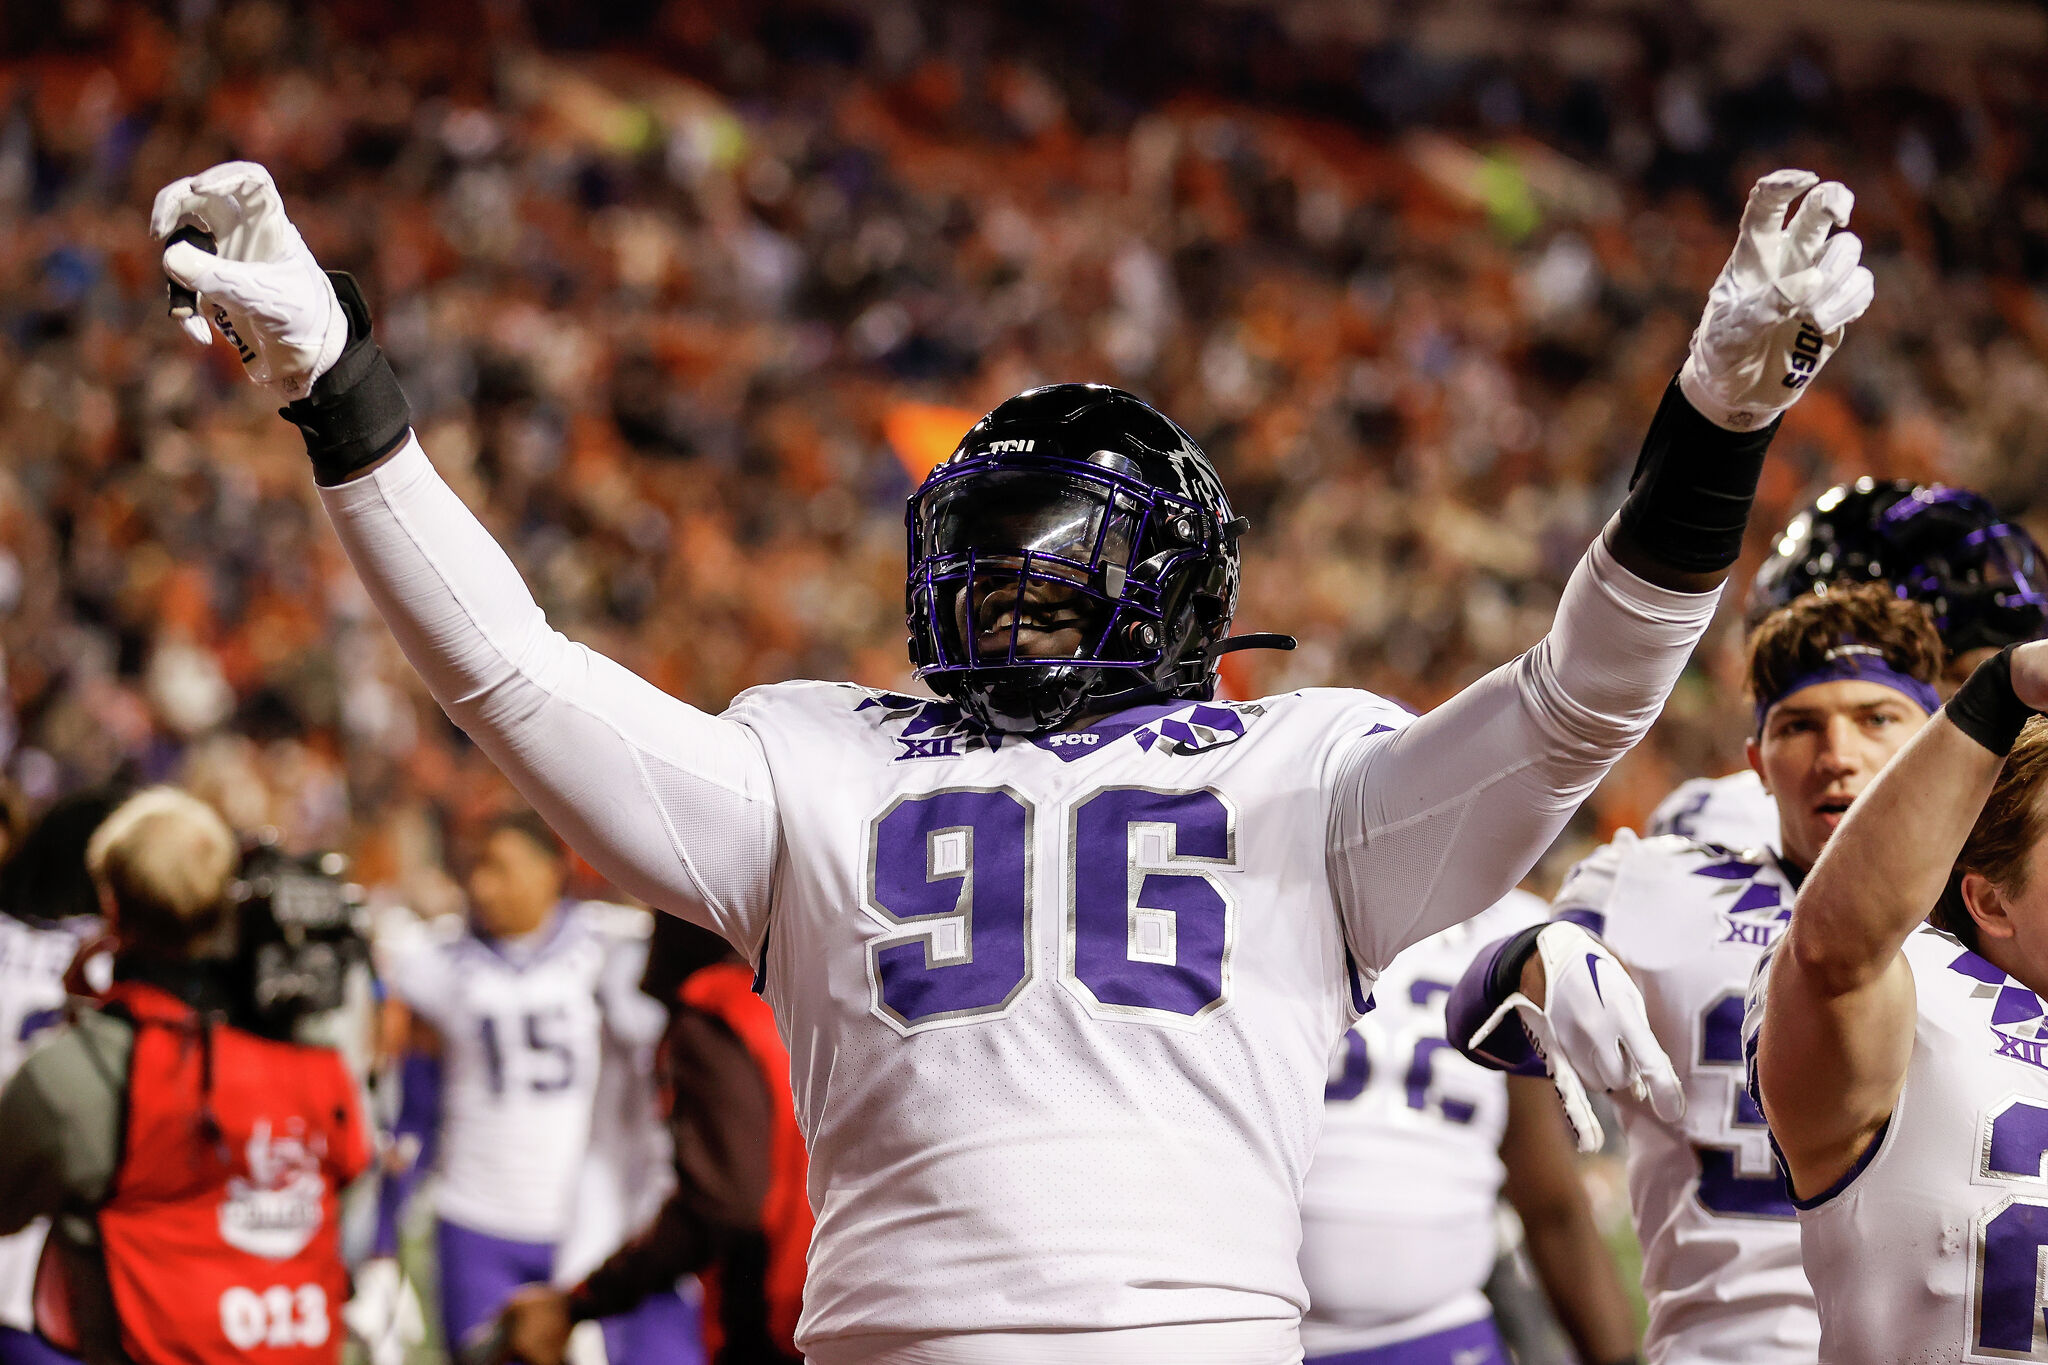 College Football Playoff outlook for TCU, other top contenders